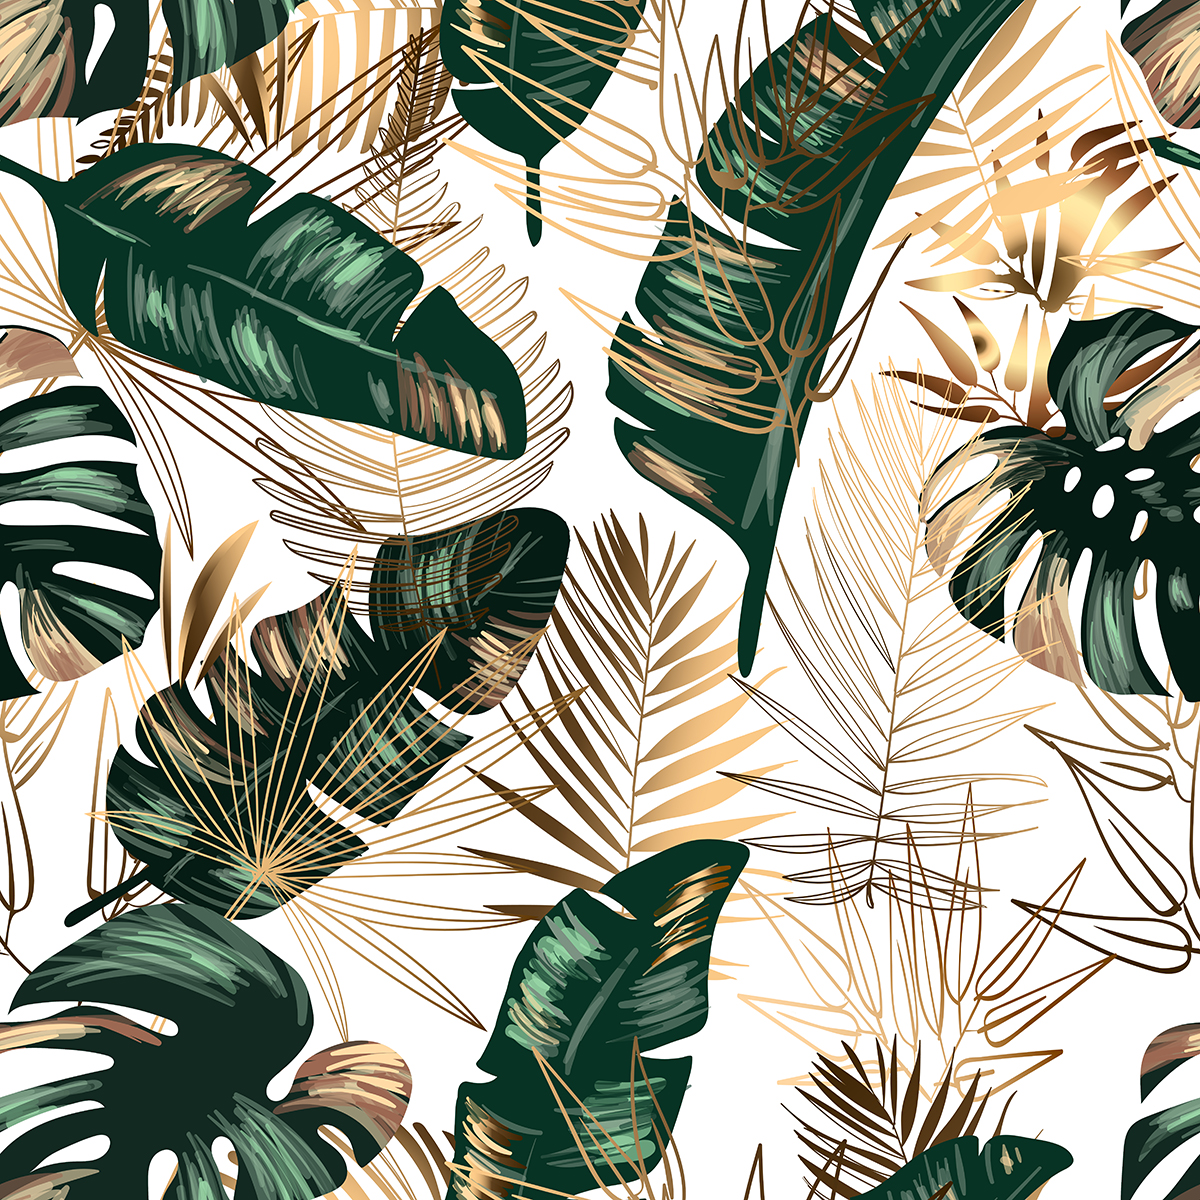 A pattern of green and gold leaves